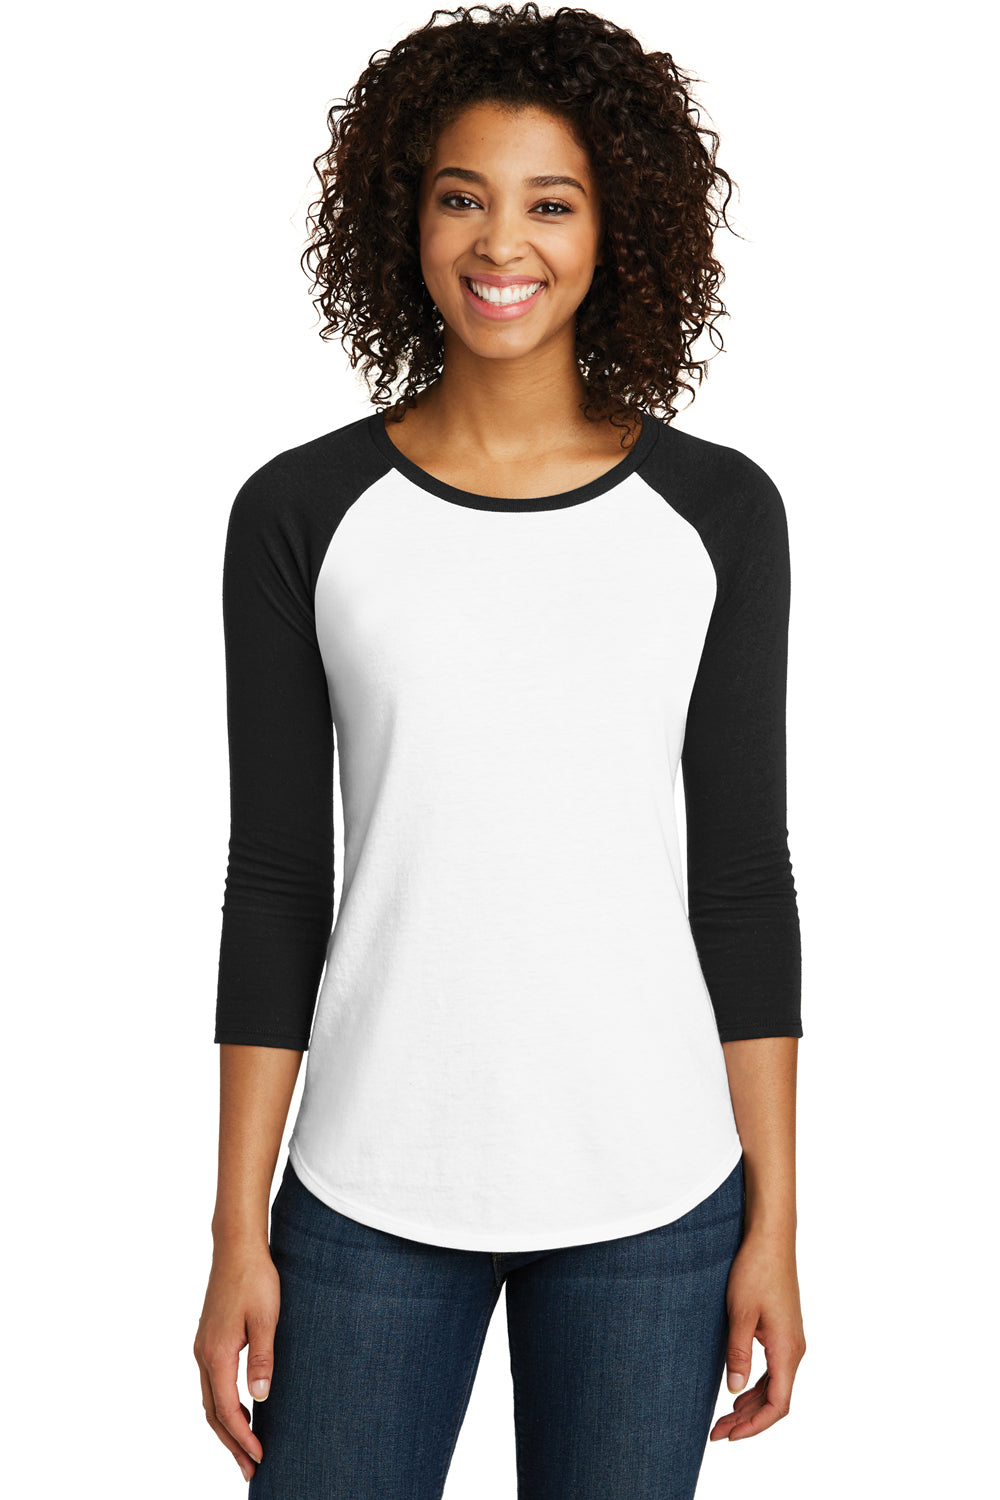 District DT6211 Womens Very Important 3/4 Sleeve Crewneck T-Shirt White/Black Front